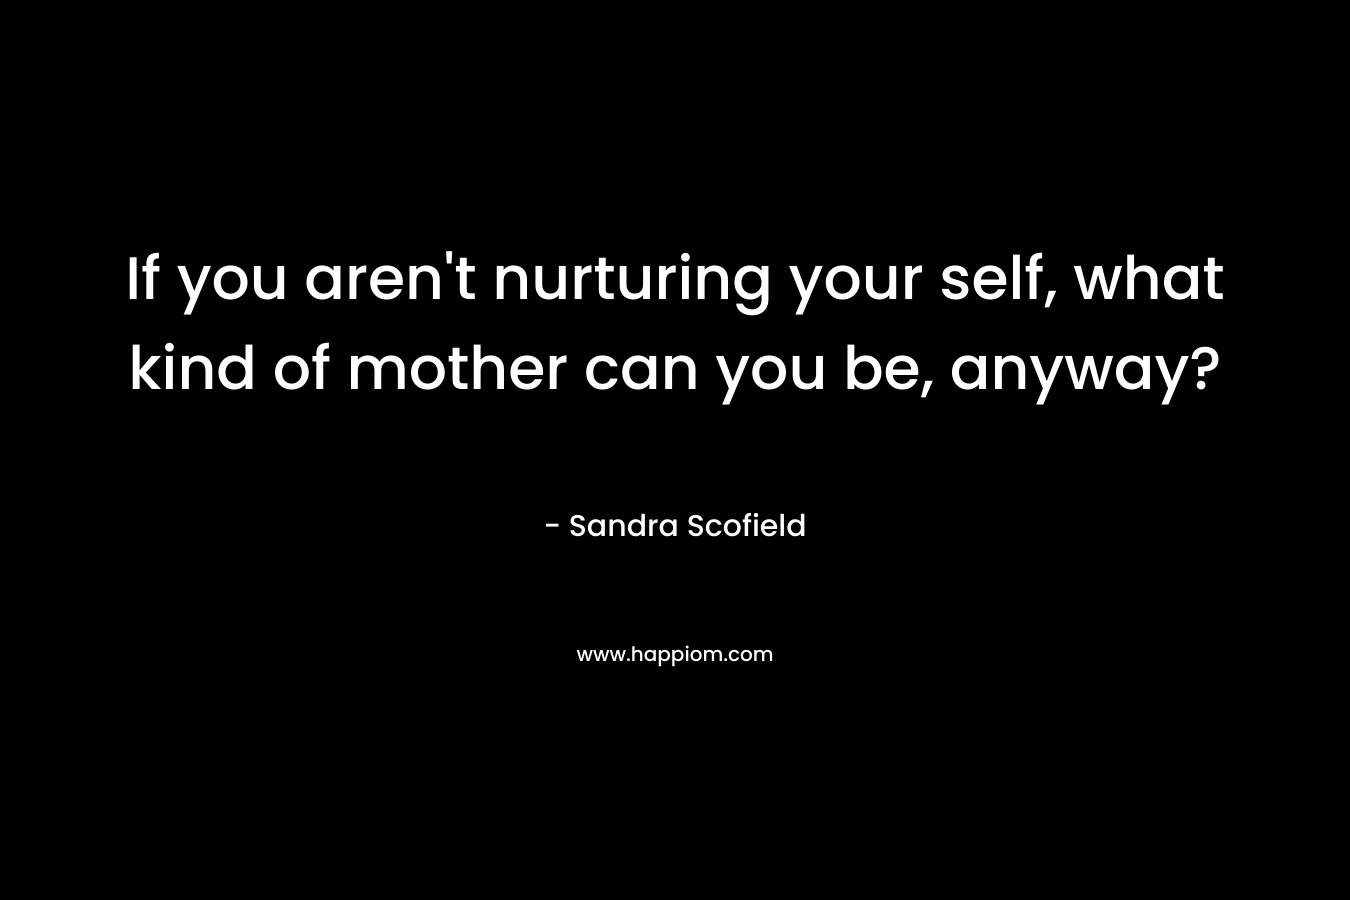 If you aren't nurturing your self, what kind of mother can you be, anyway?